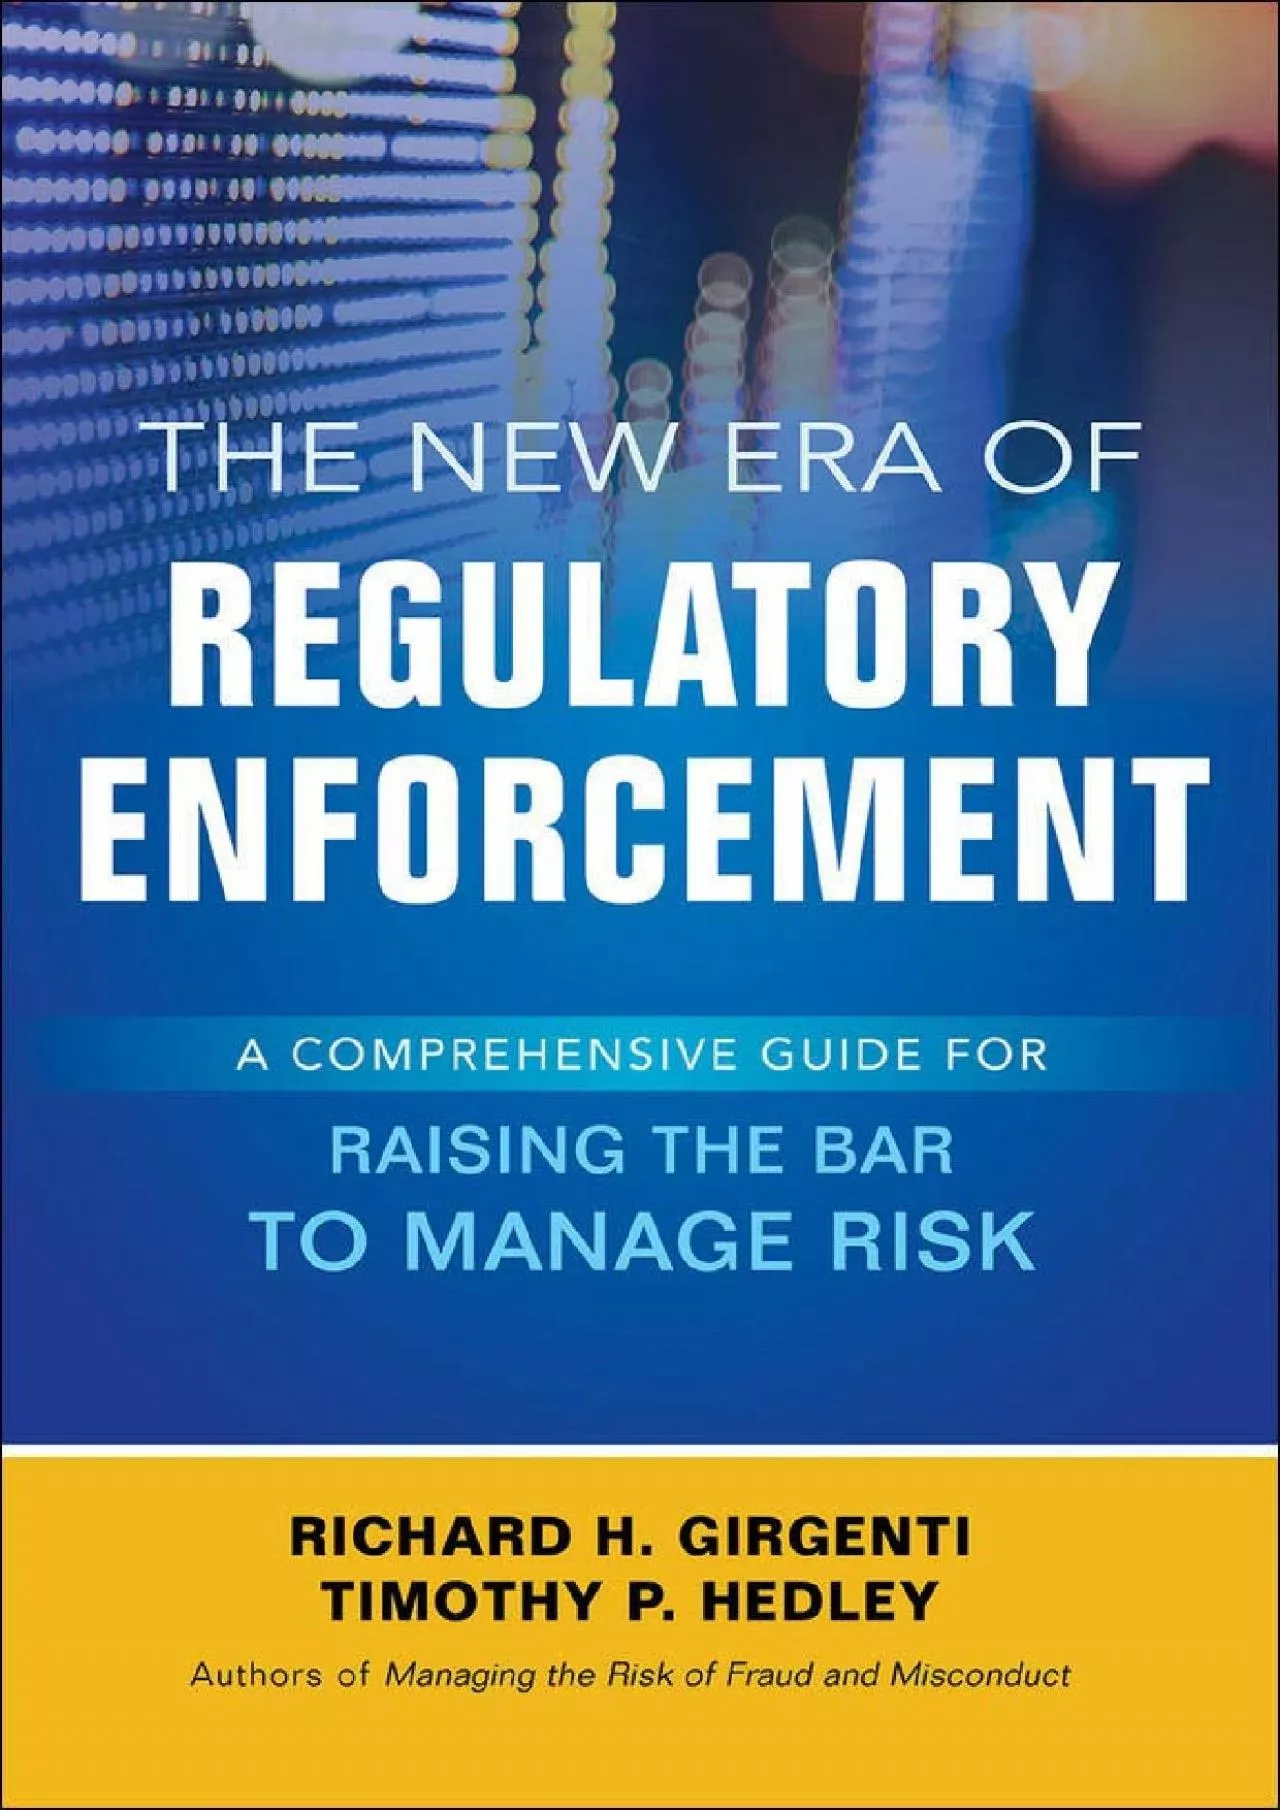 The New Era of Regulatory Enforcement: A Comprehensive Guide for Raising the Bar to Manage